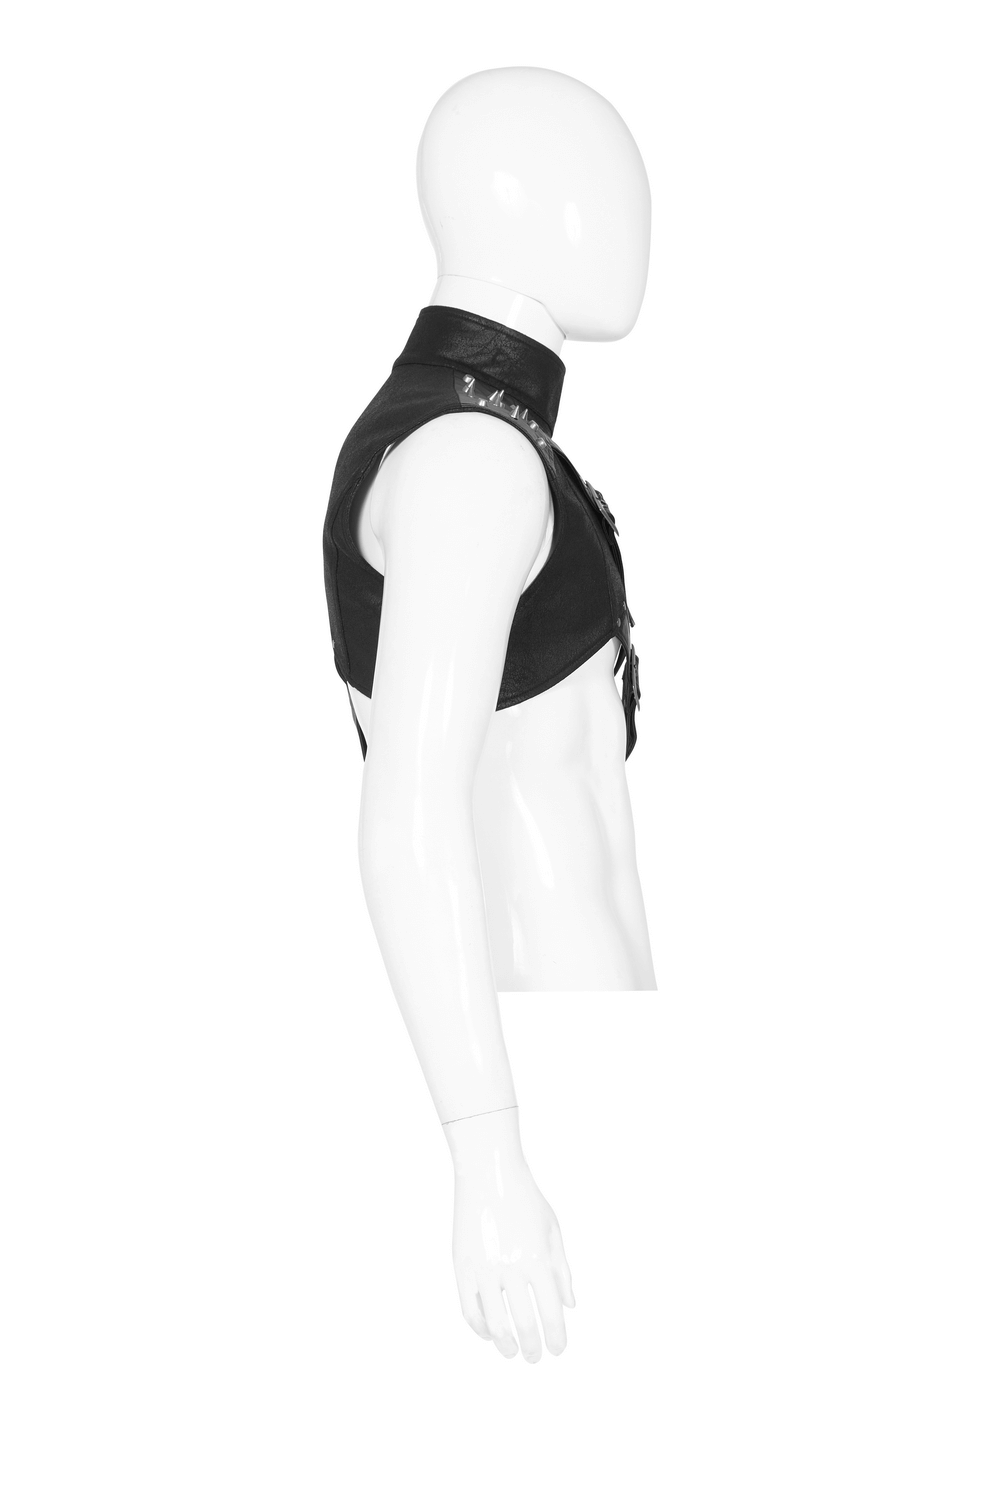 Leather Shoulder Harness for Edgy Streetwear - HARD'N'HEAVY